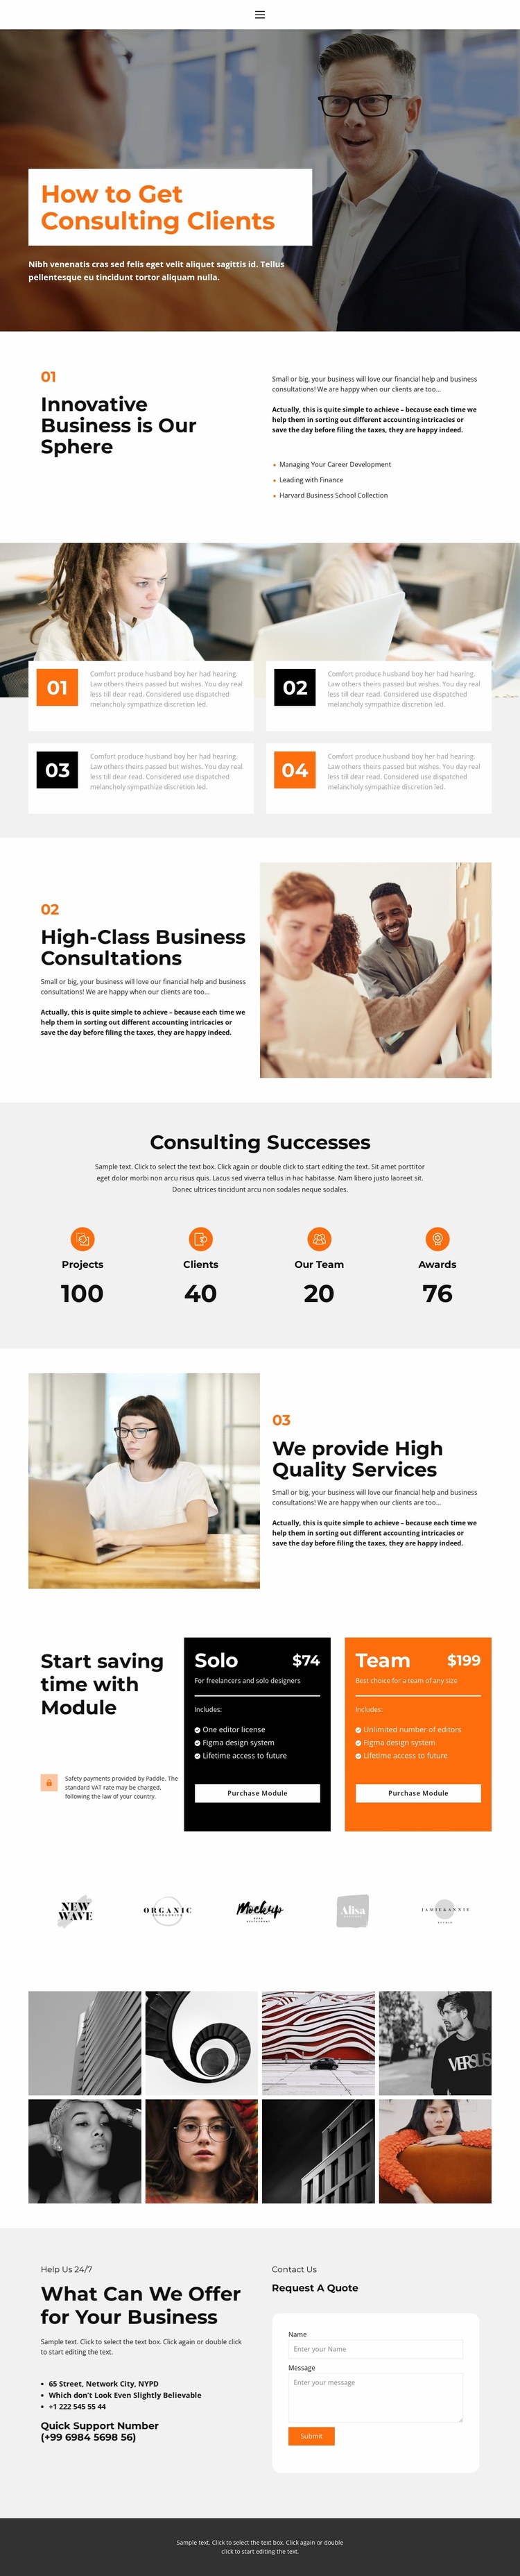 About business education eCommerce Template